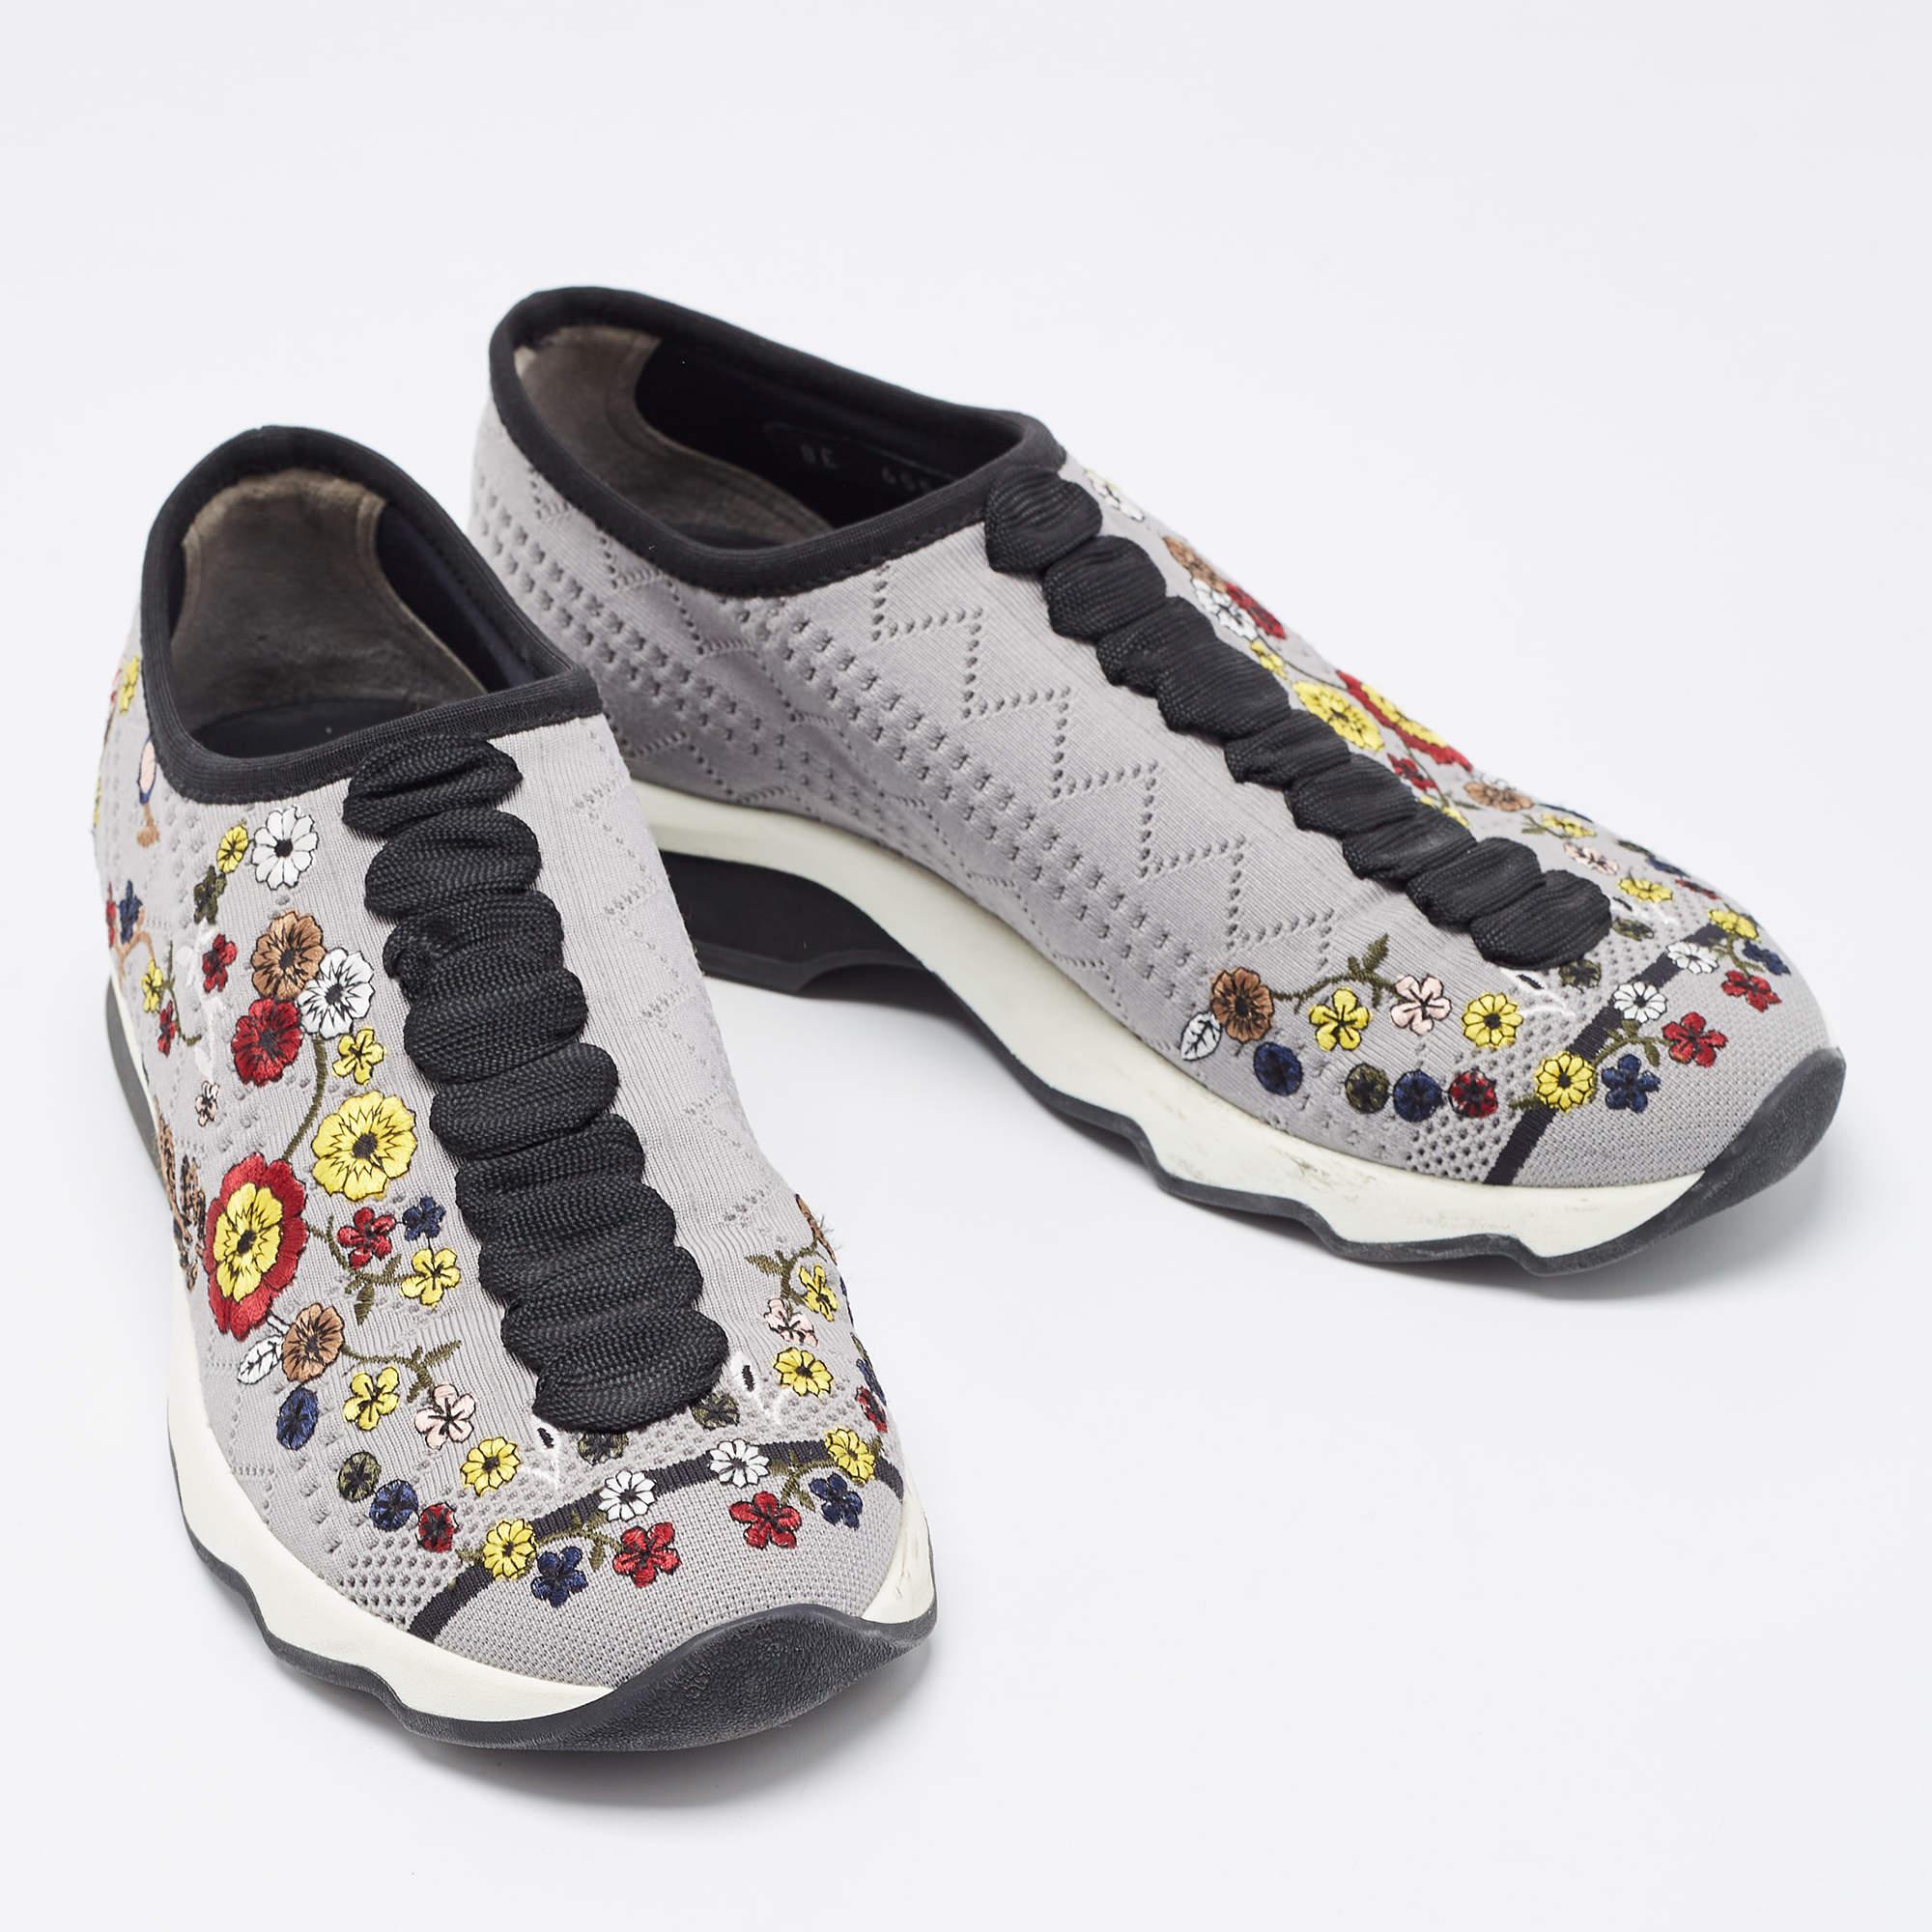 Women's Fendi Grey Floral Embroidered Knit Fabric Slip On Sneakers Size 38 For Sale